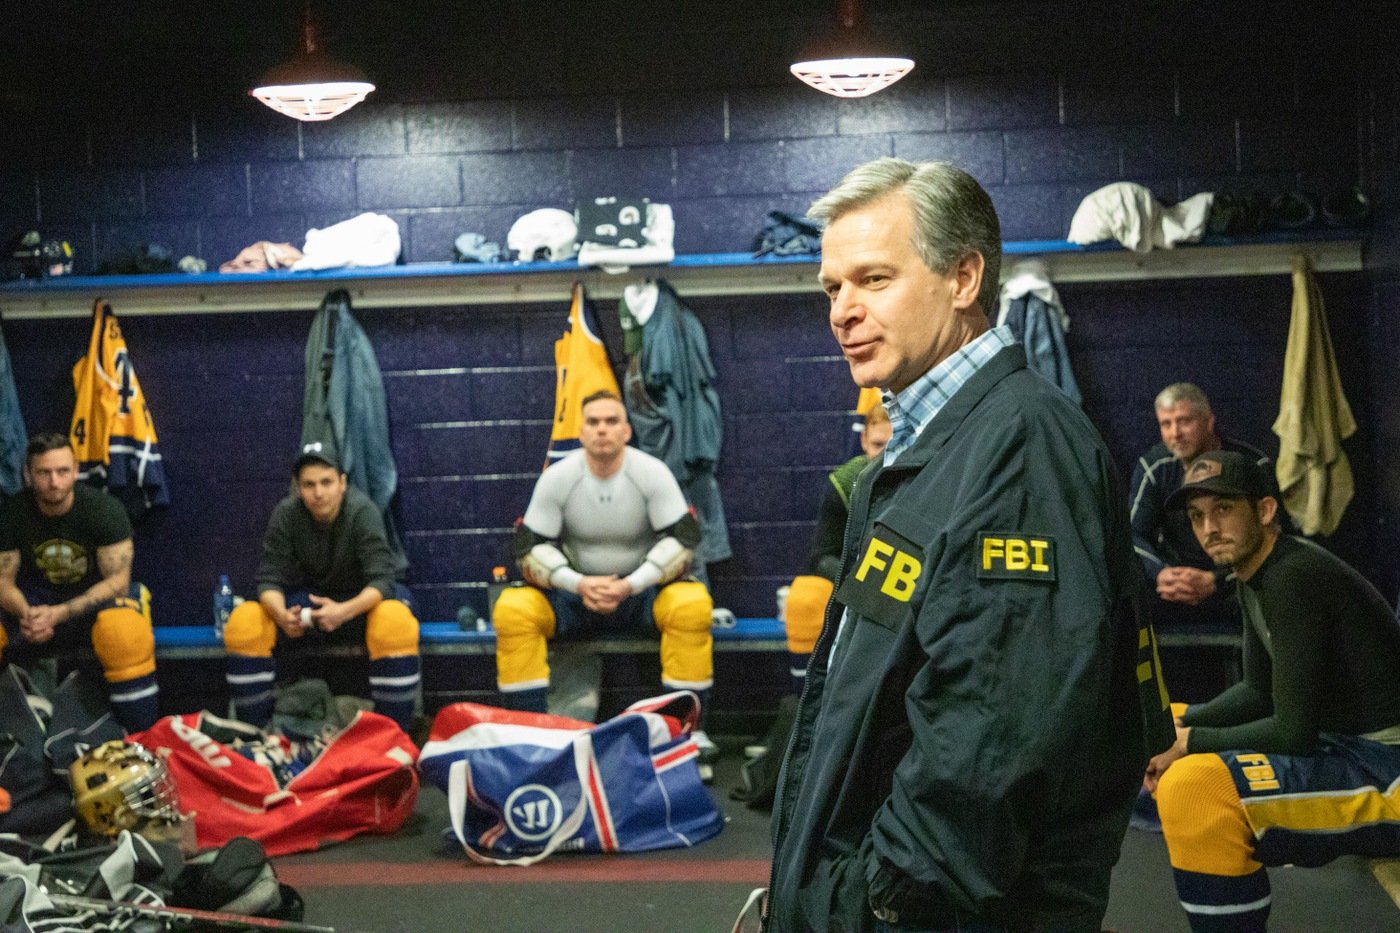 Director Christopher Wray with the FBI hockey team before their game against the U.S. Secret Service on April 30, 2022.